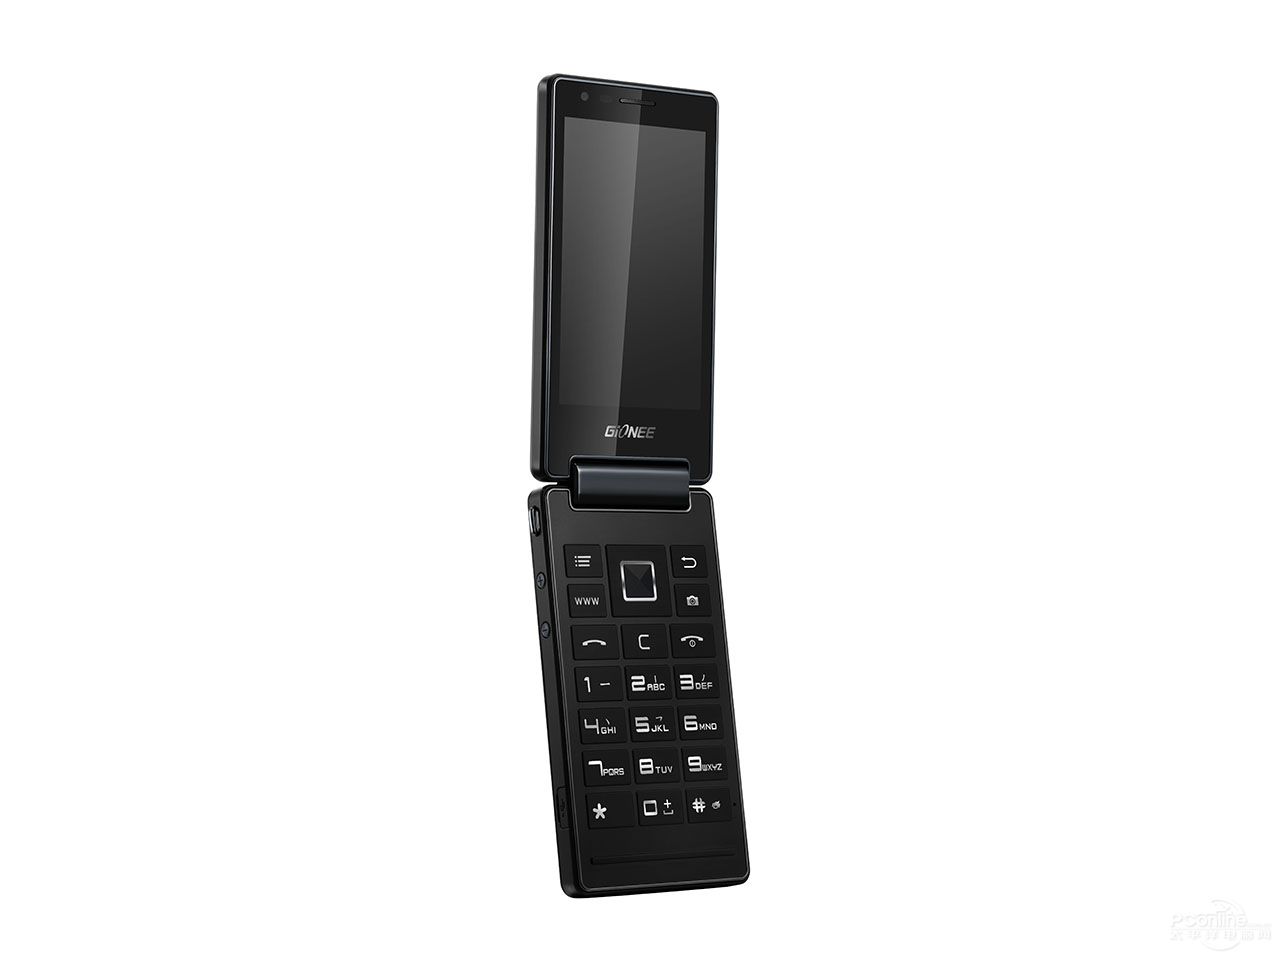 Gionee W800 mobile